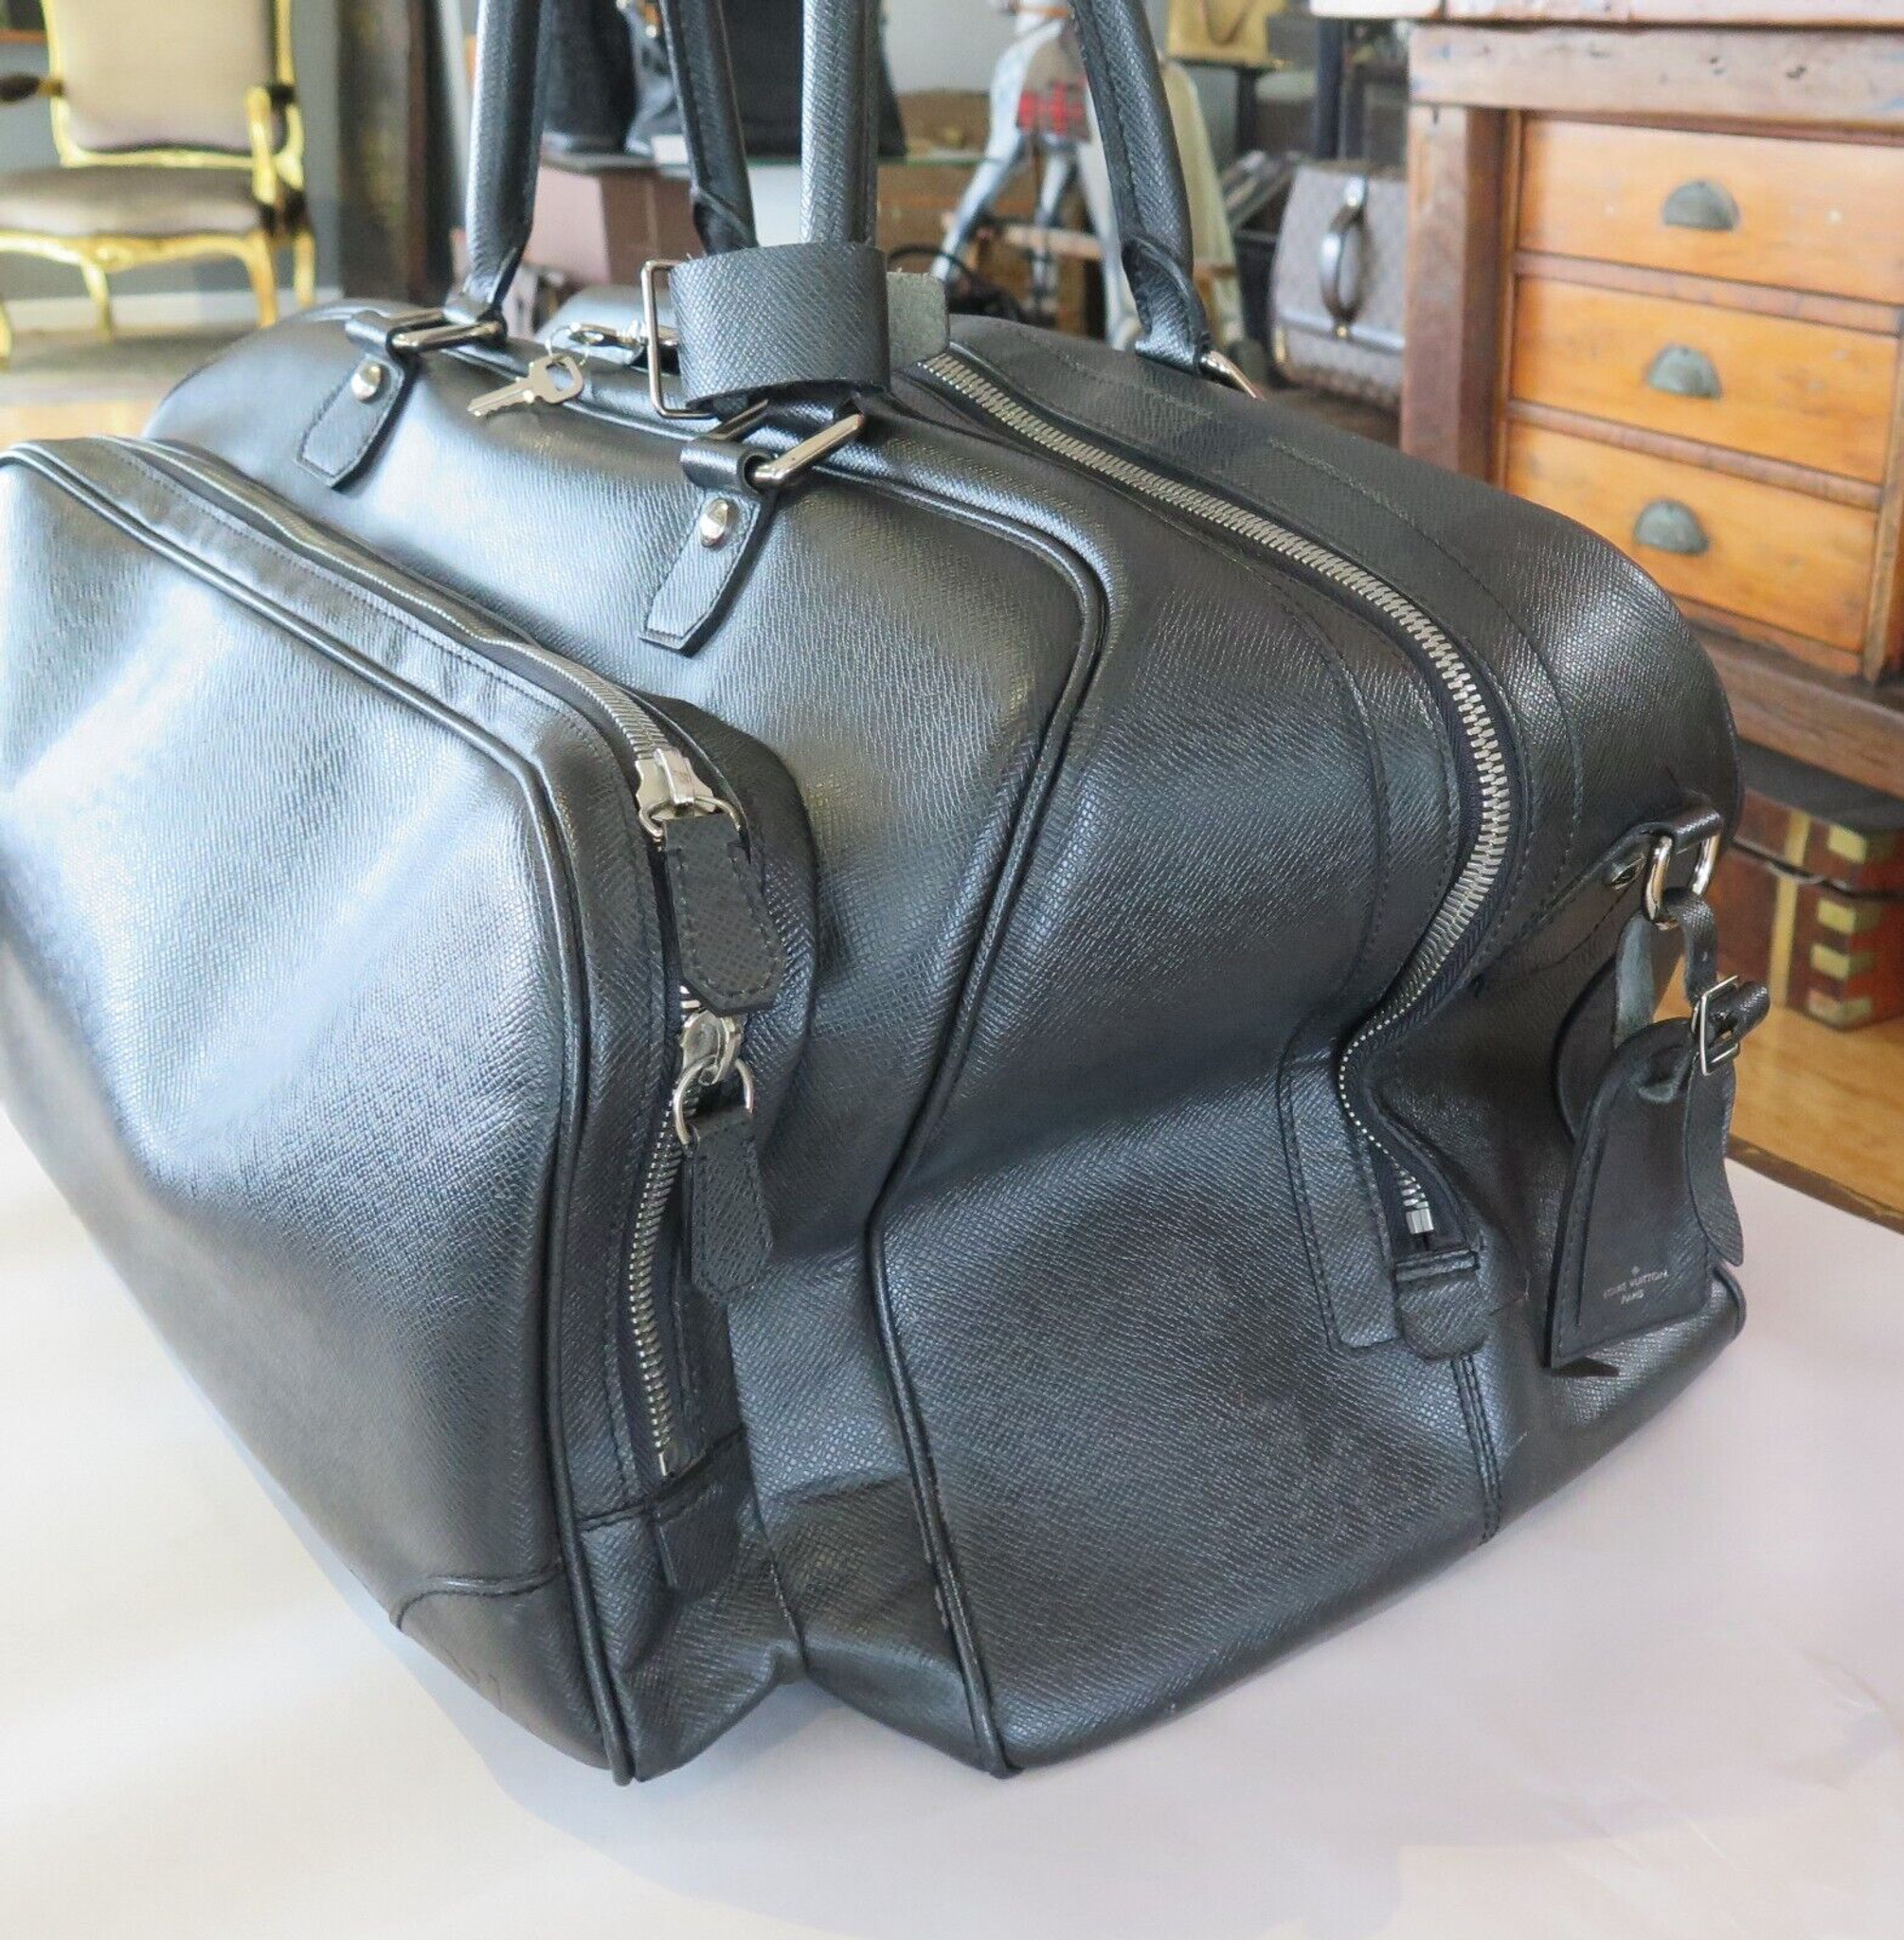 Louis Vuitton Limited Edition Leather Duffle Bag Black - NOBLEMARS